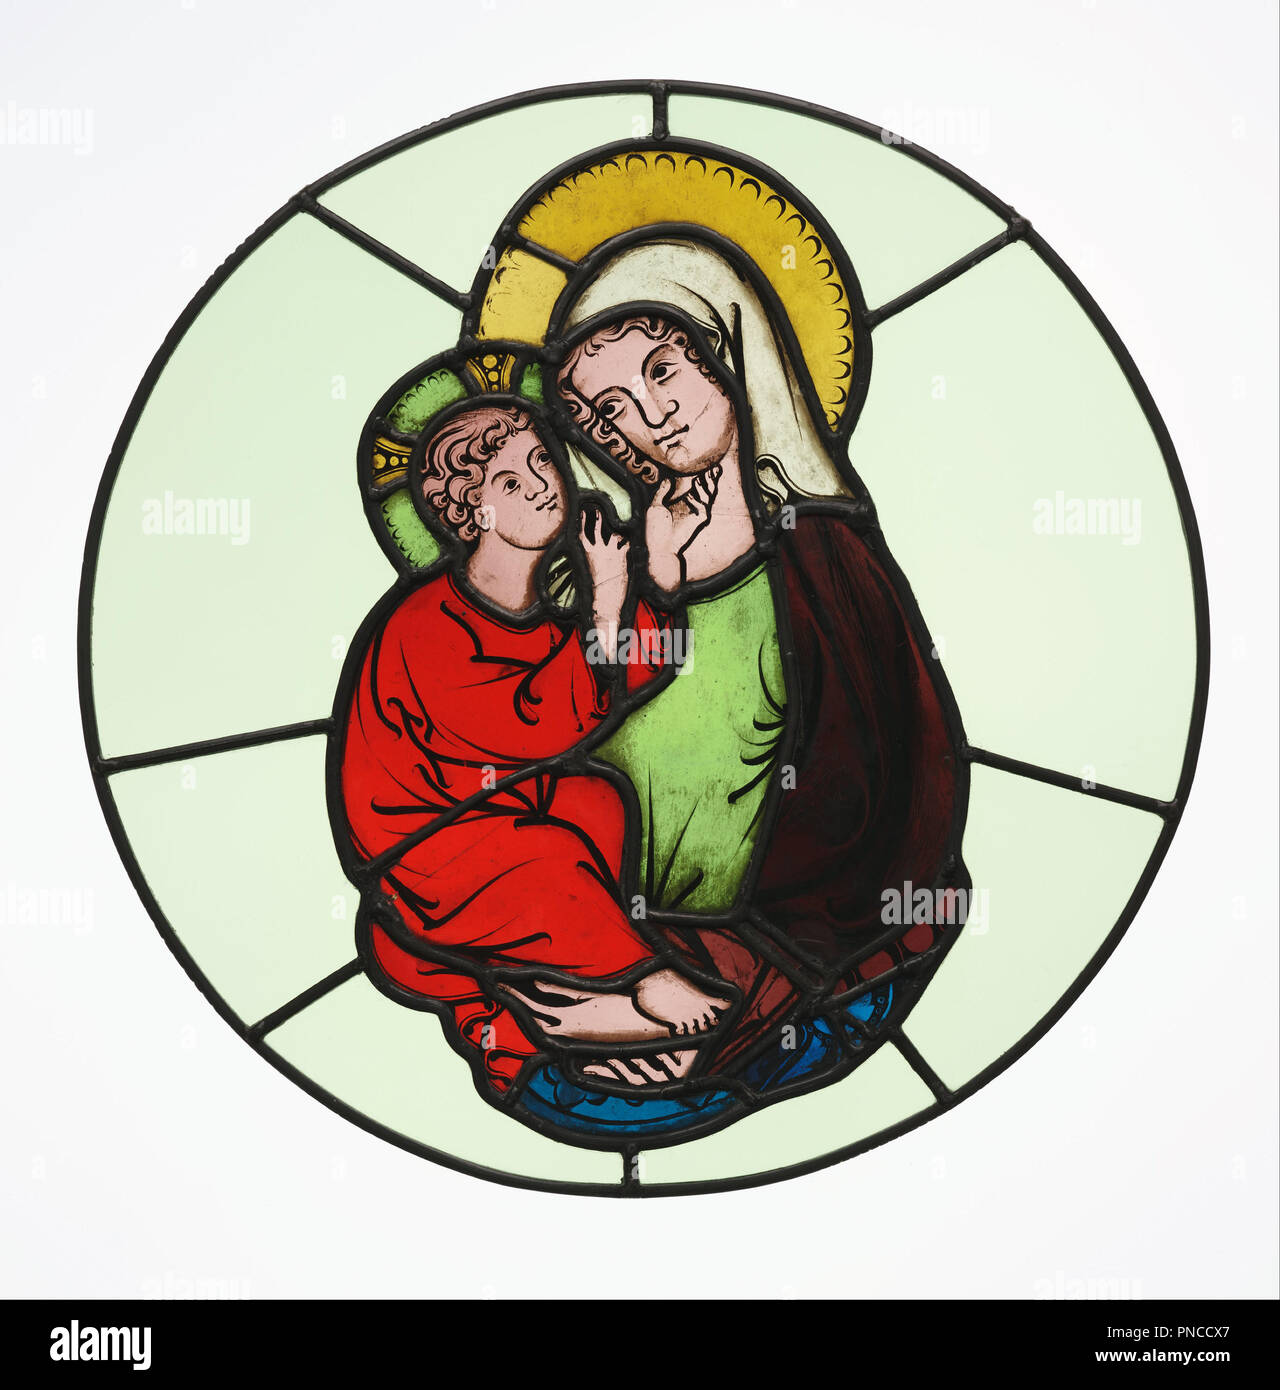 The Virgin and Child. Date/Period: Ca. 1335. Stained Glass. Pot-metal and colorless glass, oxide paint, and silver stain; lead came. Height: 359 mm (14.13 in); Width: 203 mm (7.99 in). Author: Master of Klosterneuburg. Stock Photo